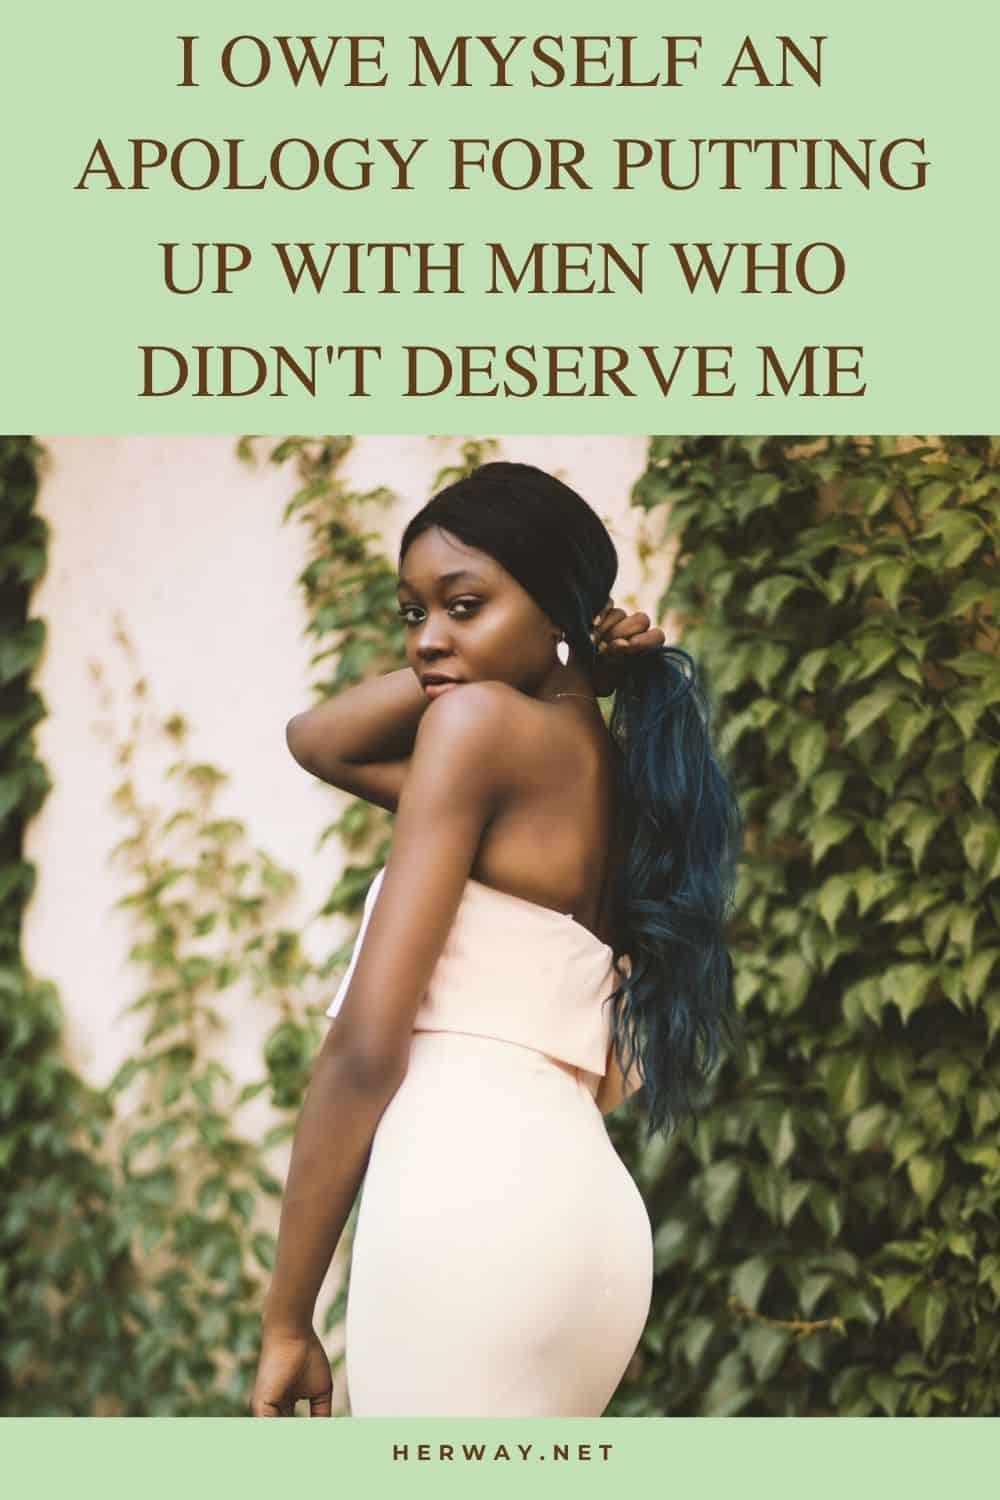 I Owe Myself An Apology For Putting Up With Men Who Didn't Deserve Me